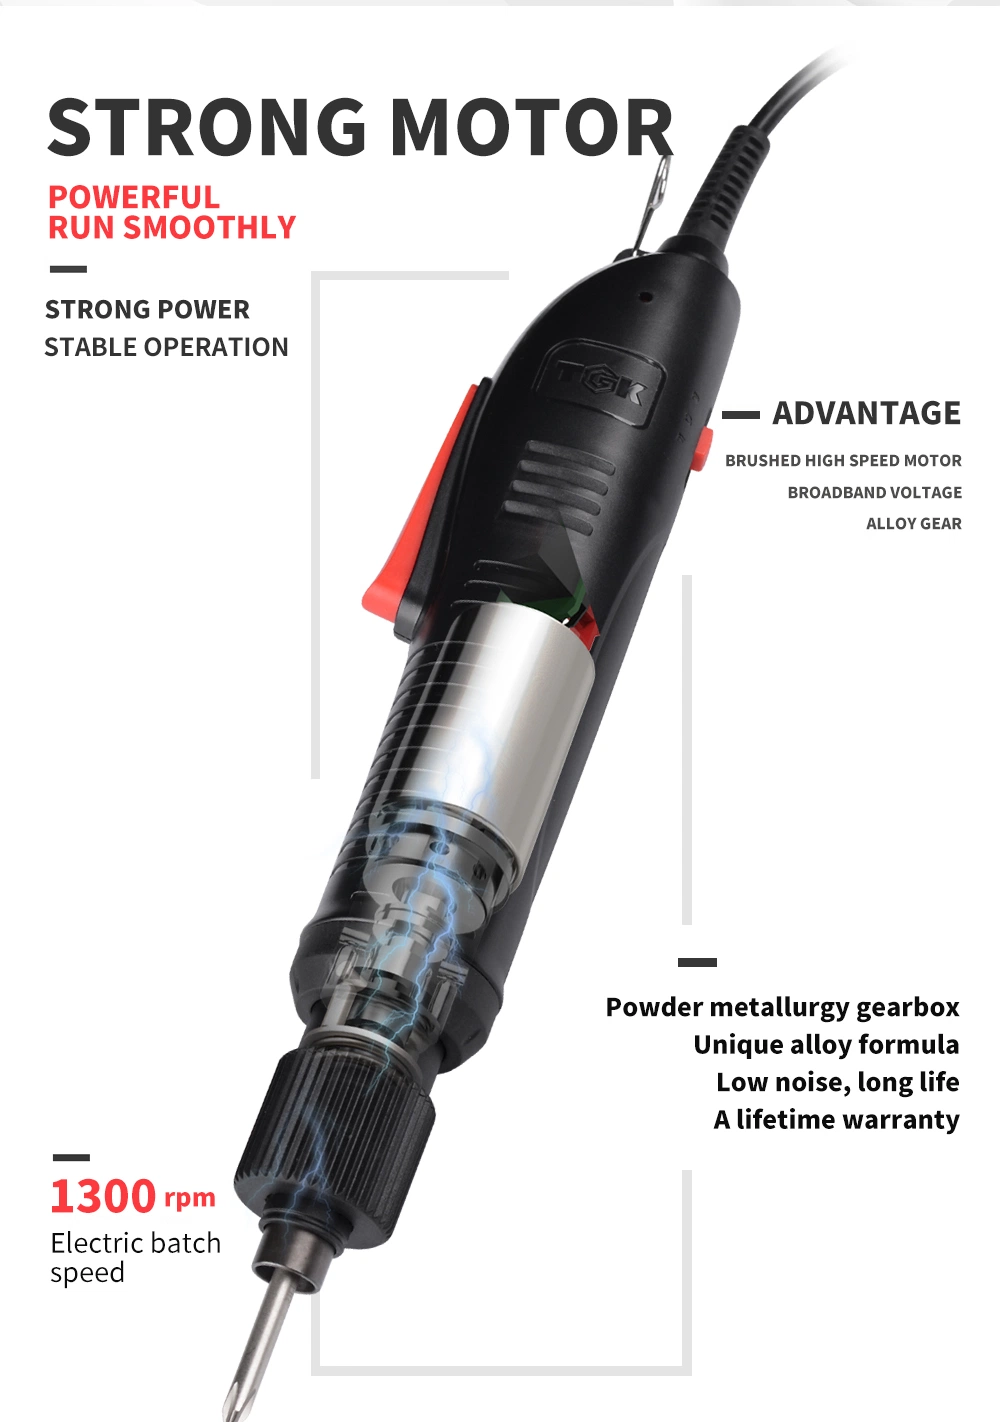 Torque Corded Electric Screwdriver to Help Tighten Some Household Items PS635